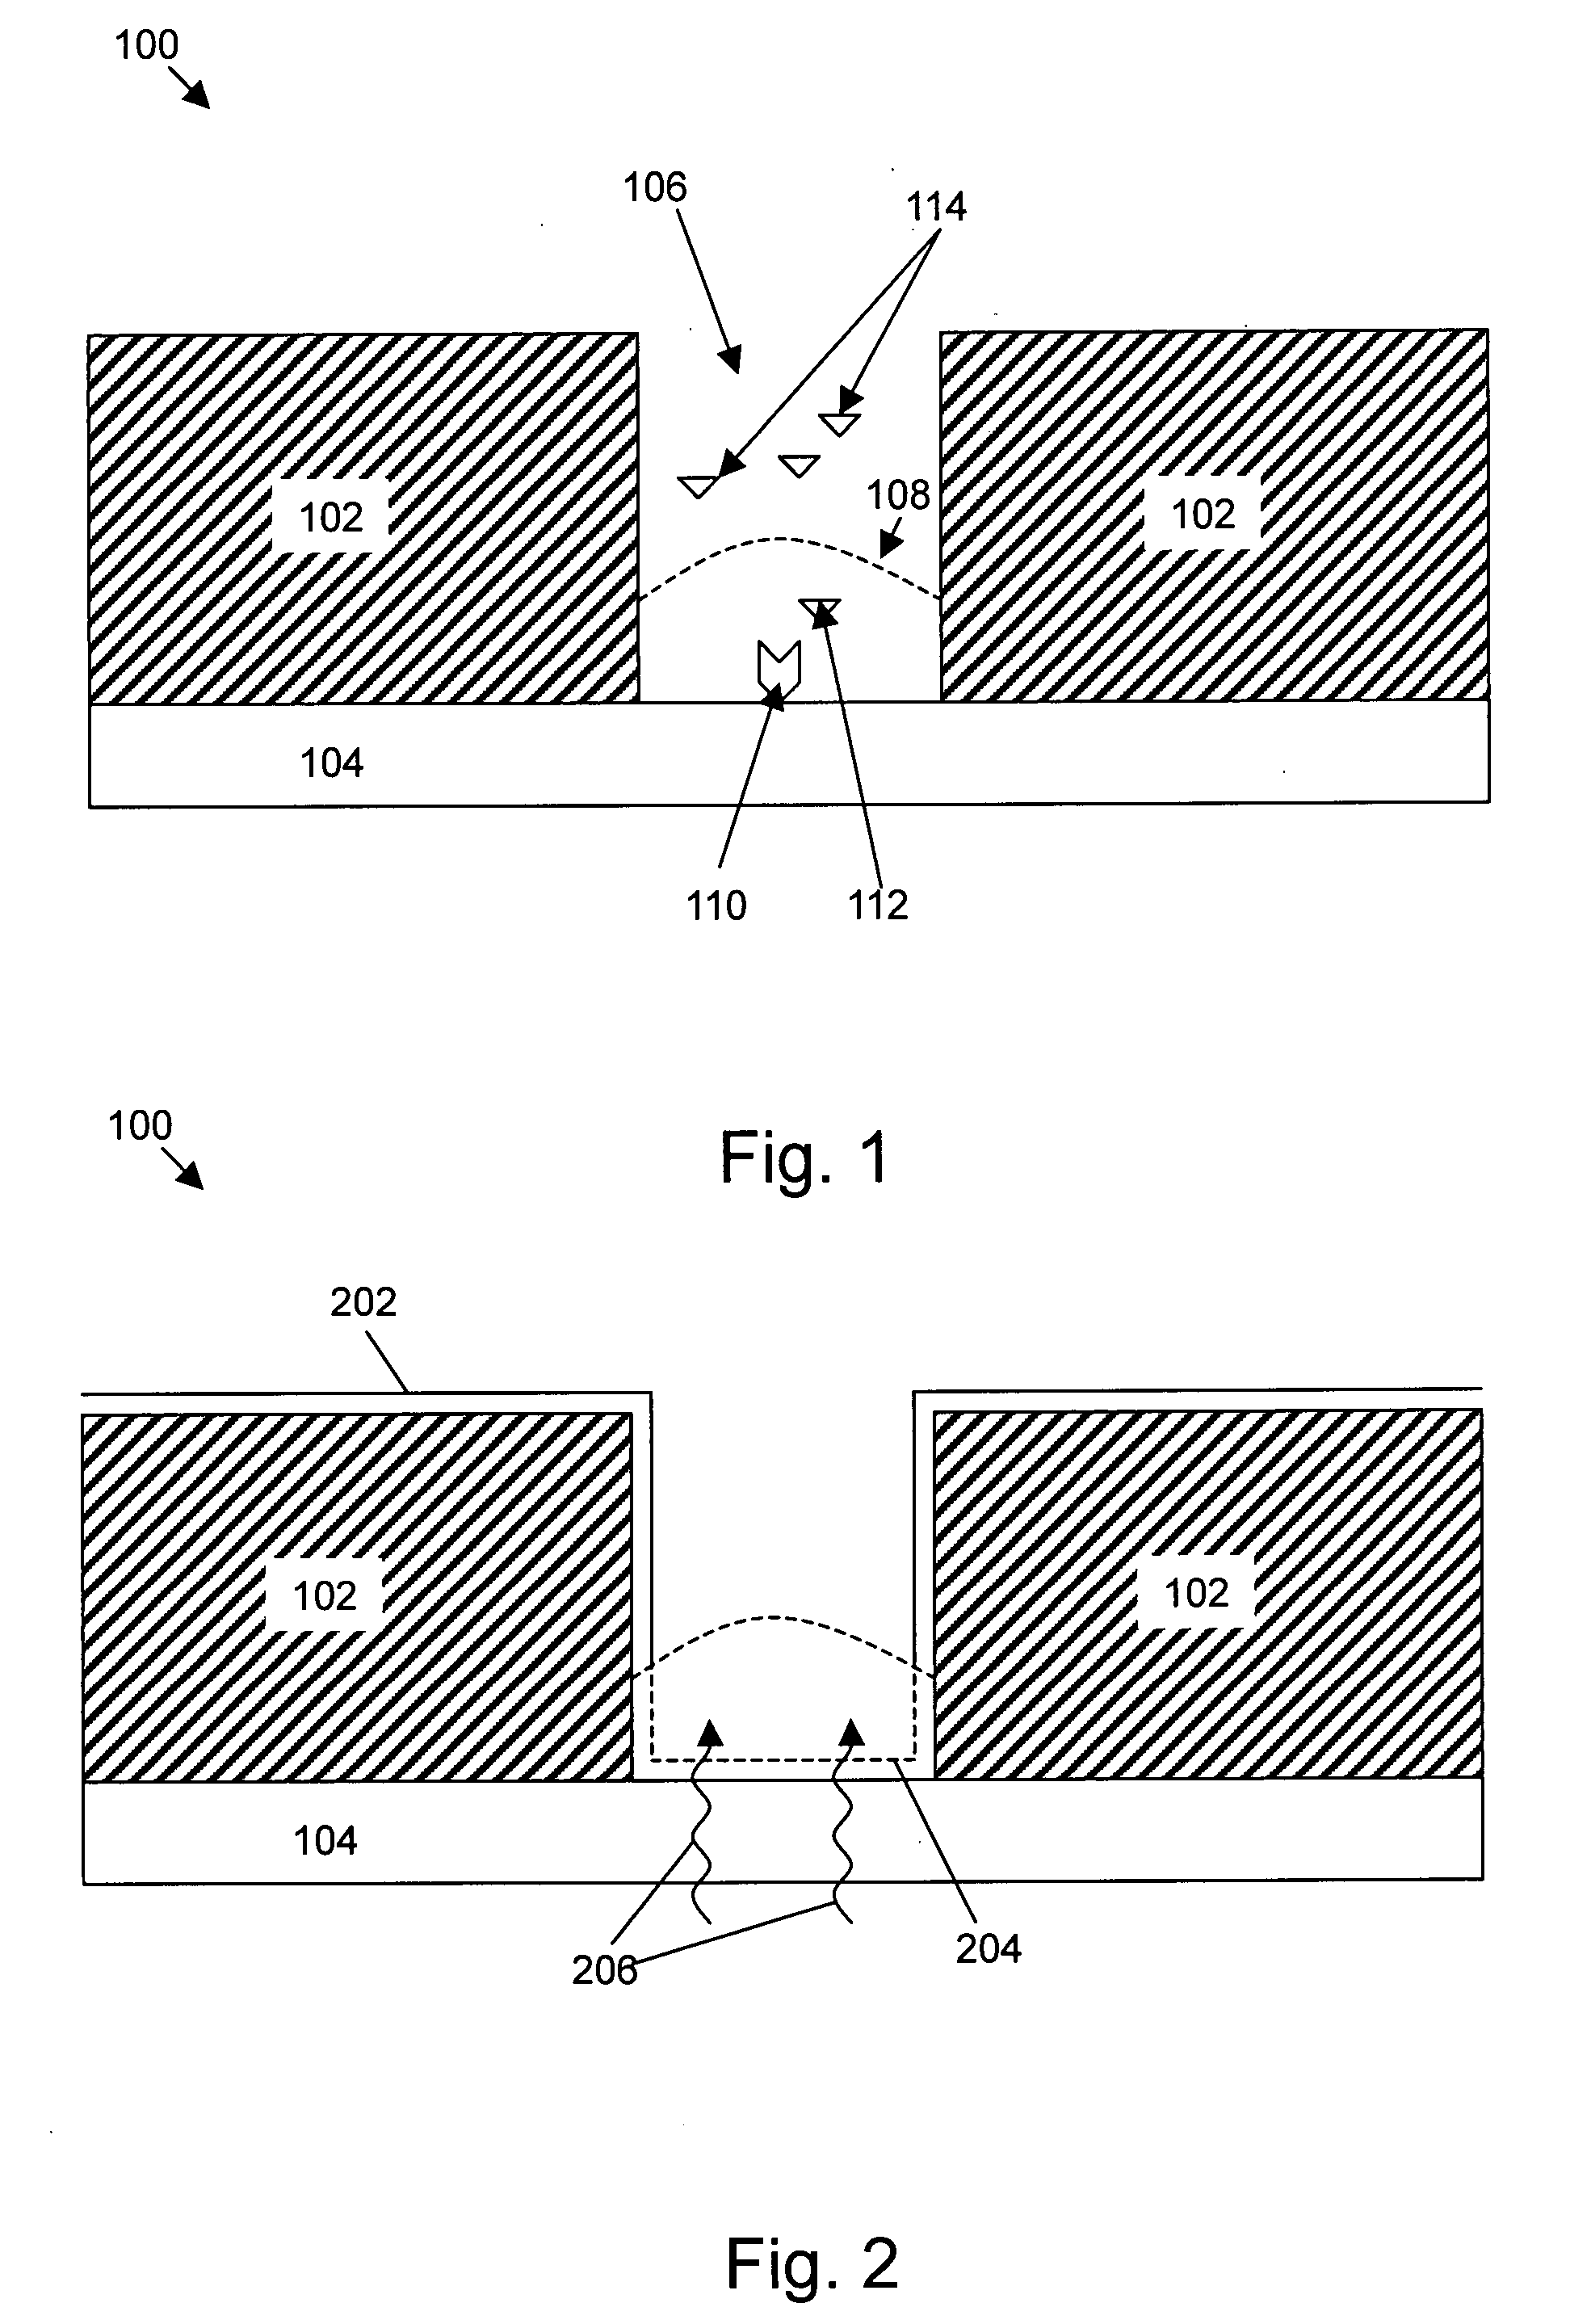 Articles having localized molecules disposed thereon and methods of producing and using same